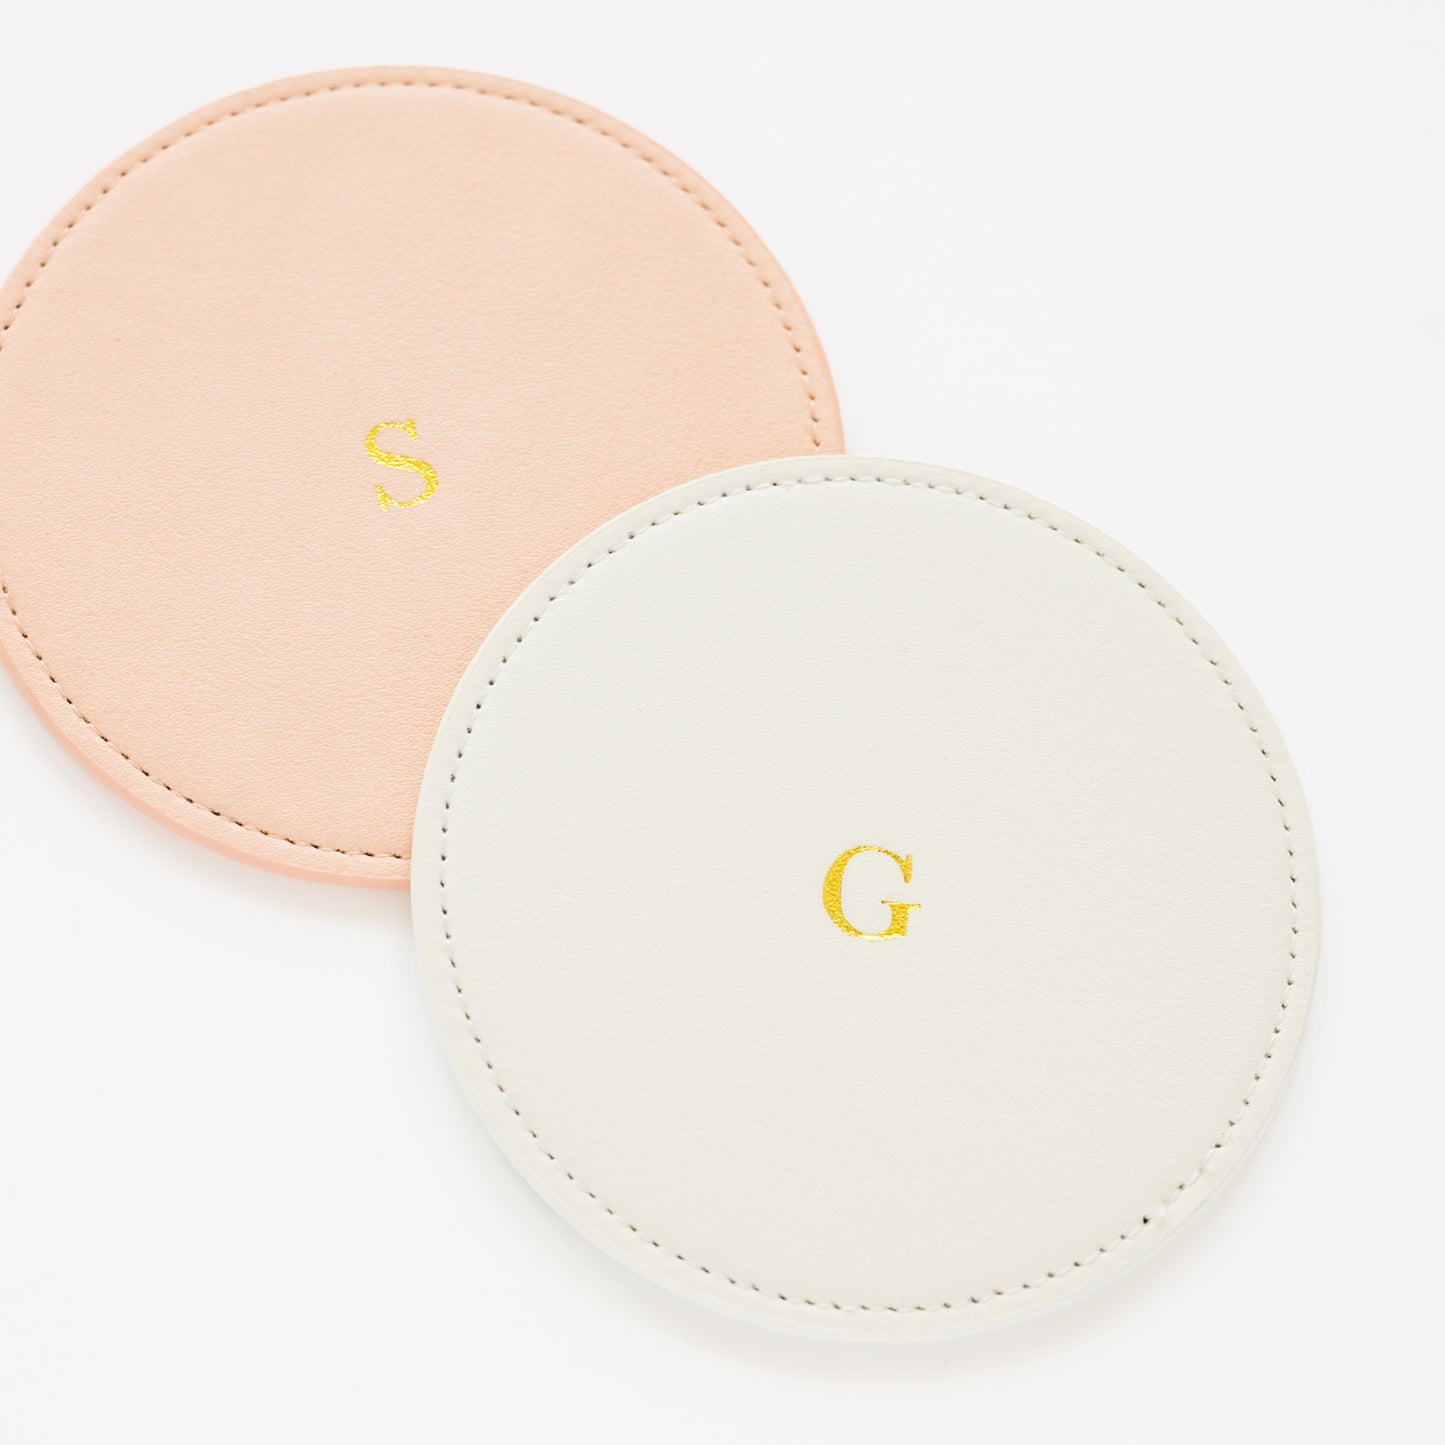 Pink and white monogrammed coasters